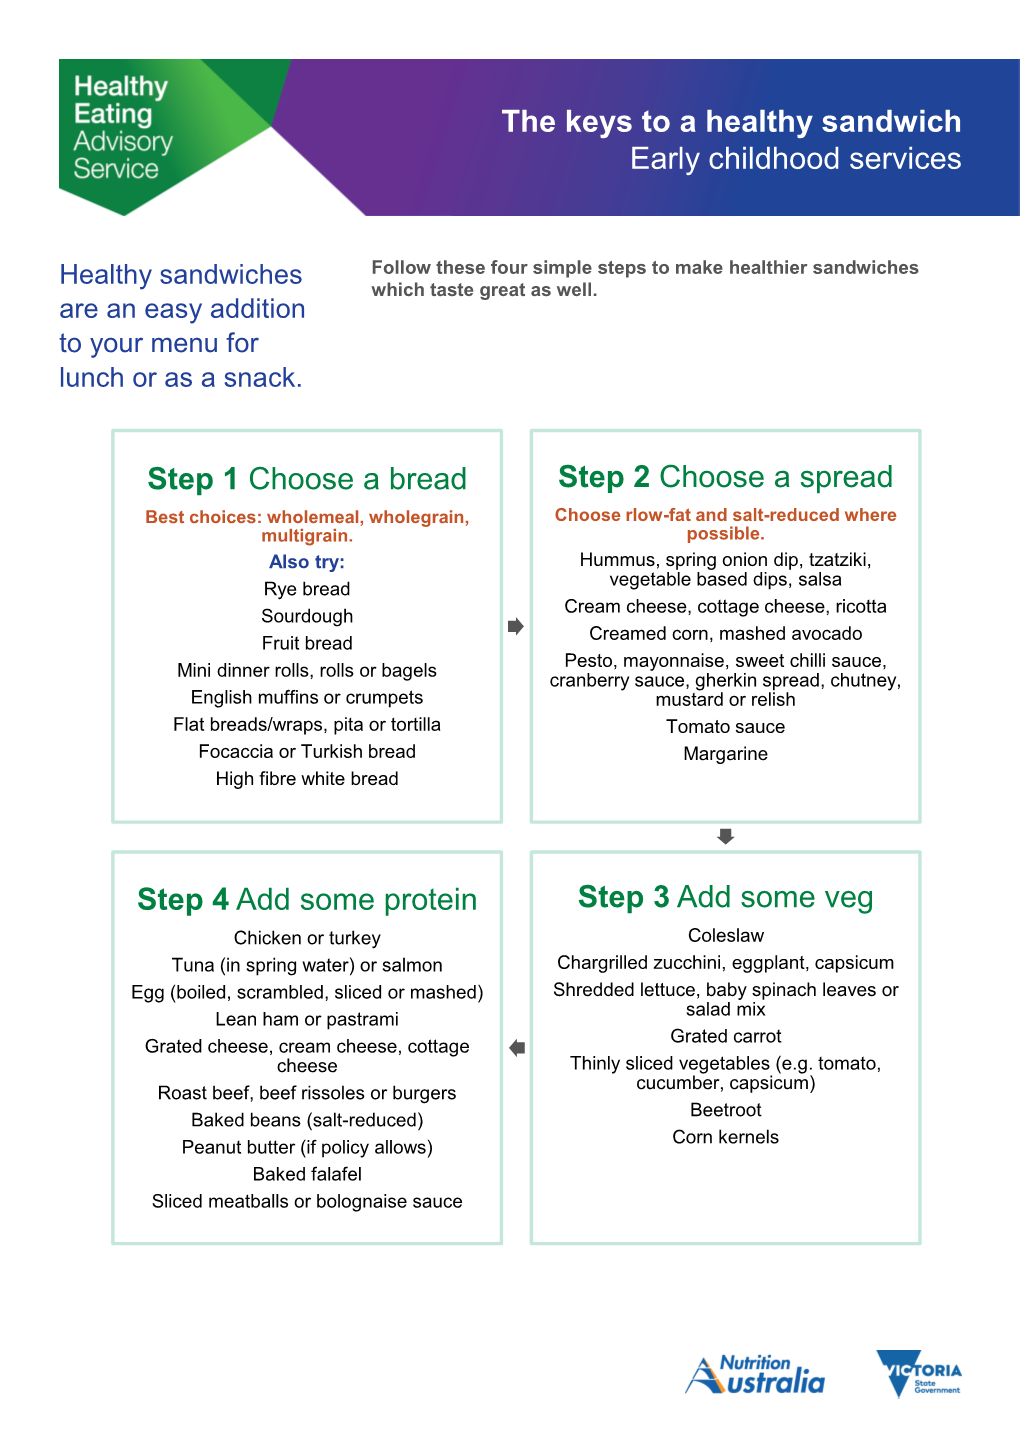 The Keys to a Healthy Sandwich Early Childhood Services